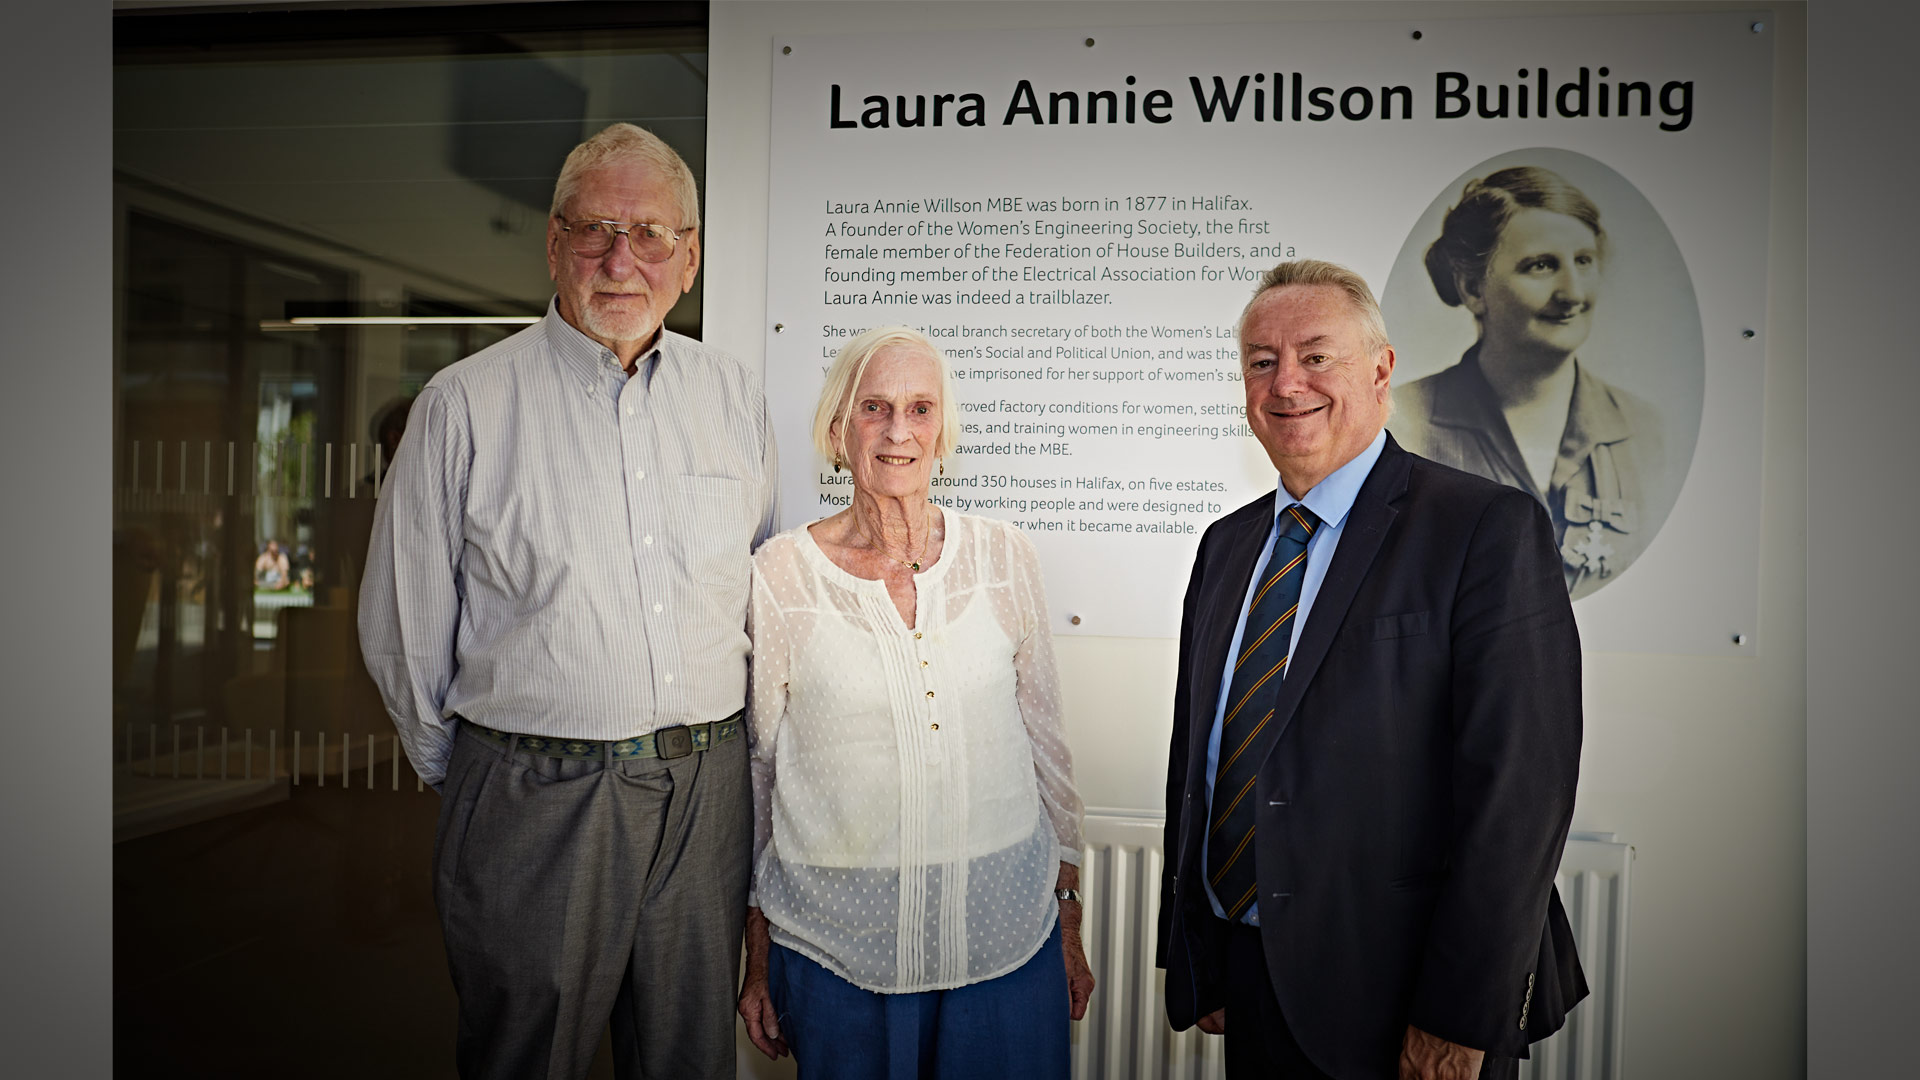 The official opening of the new Laura Annie Willson Building